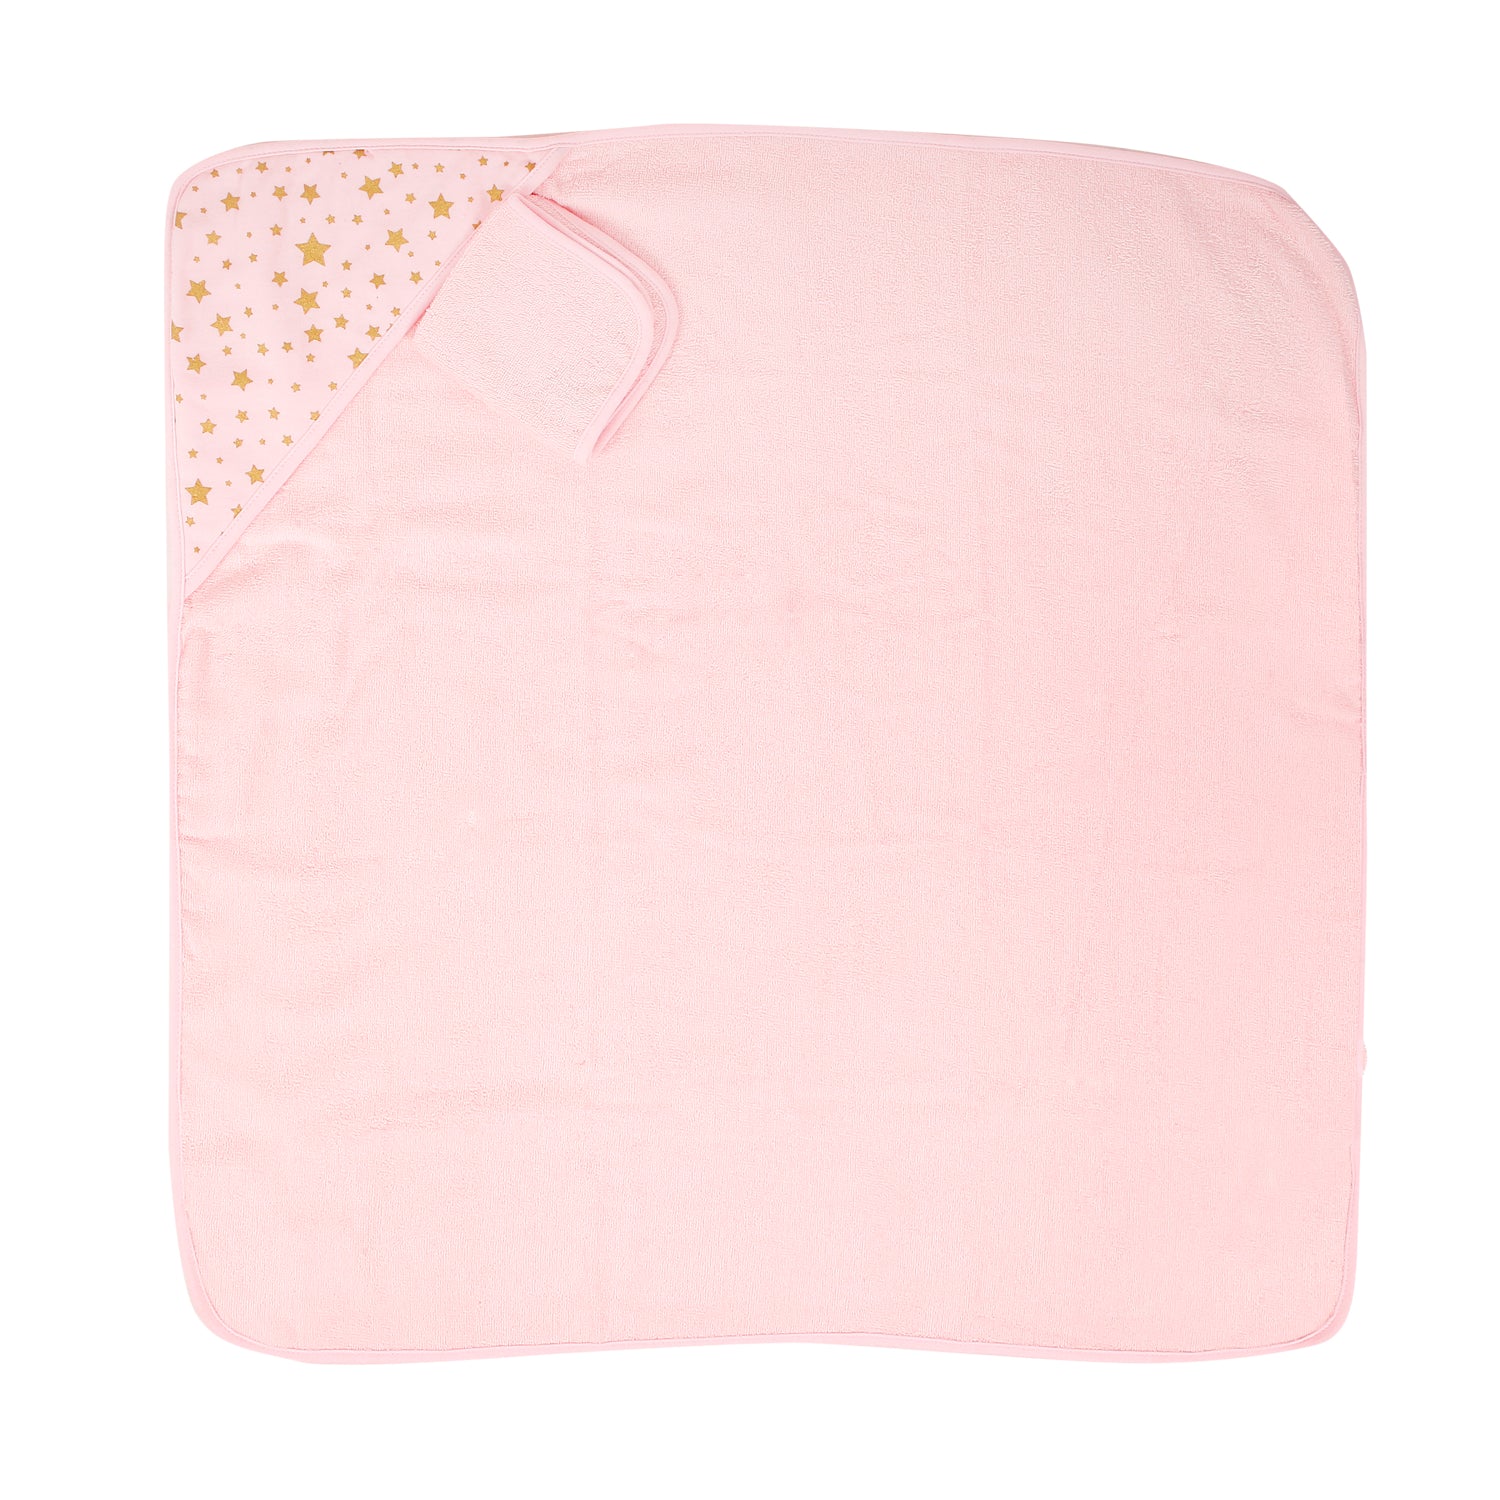 Starry Pink Hooded Towel & Wash Cloth Set